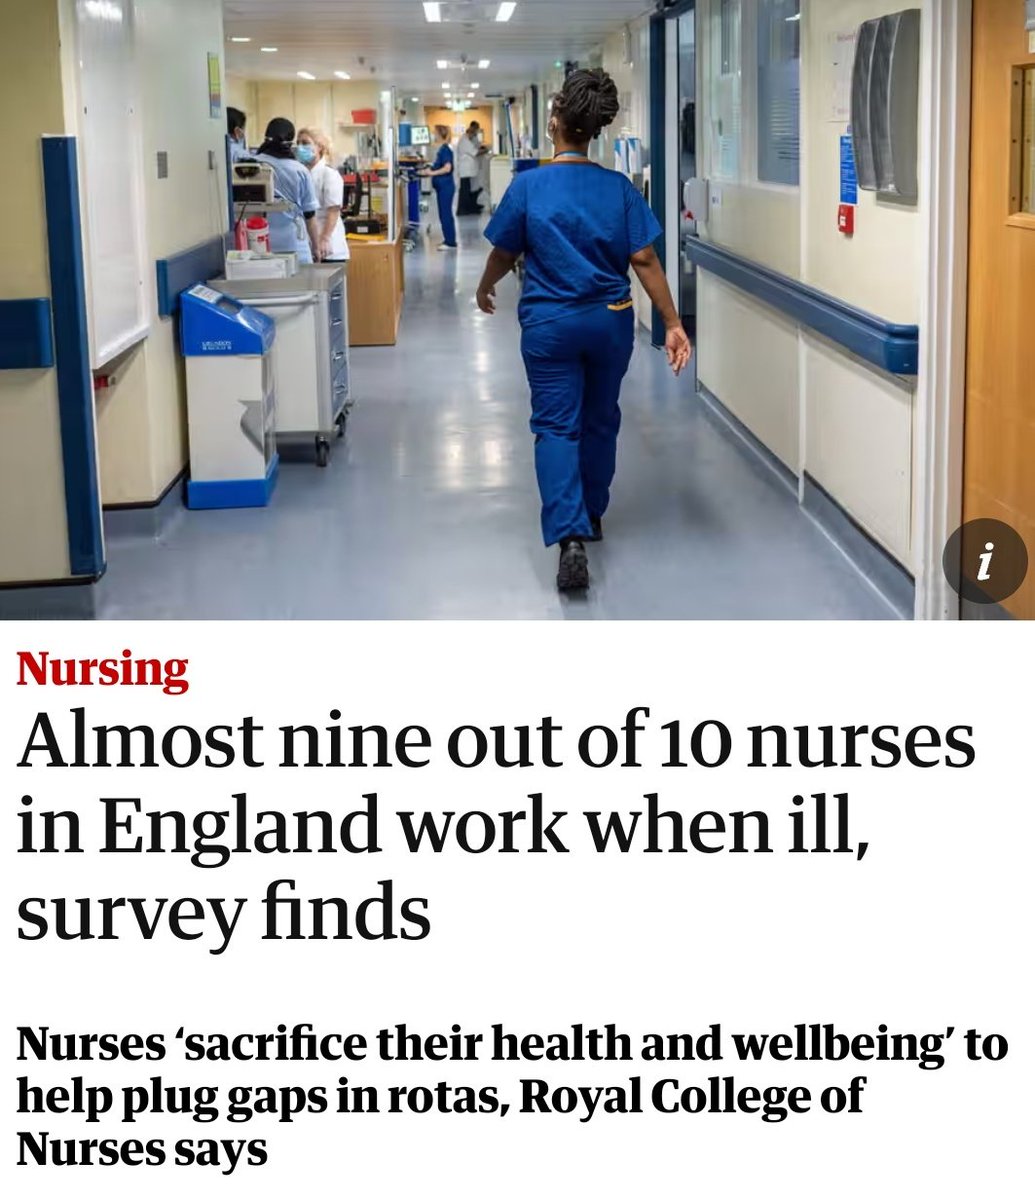 This is not okay. Nurses are so dedicated and hospitals are so short staffed that 9 in 10 Nurse work when ill. The pressure to not take time off is so real. And the stress and pressure so high. Still the government refuses to address safe staffing and the nursing crisis.